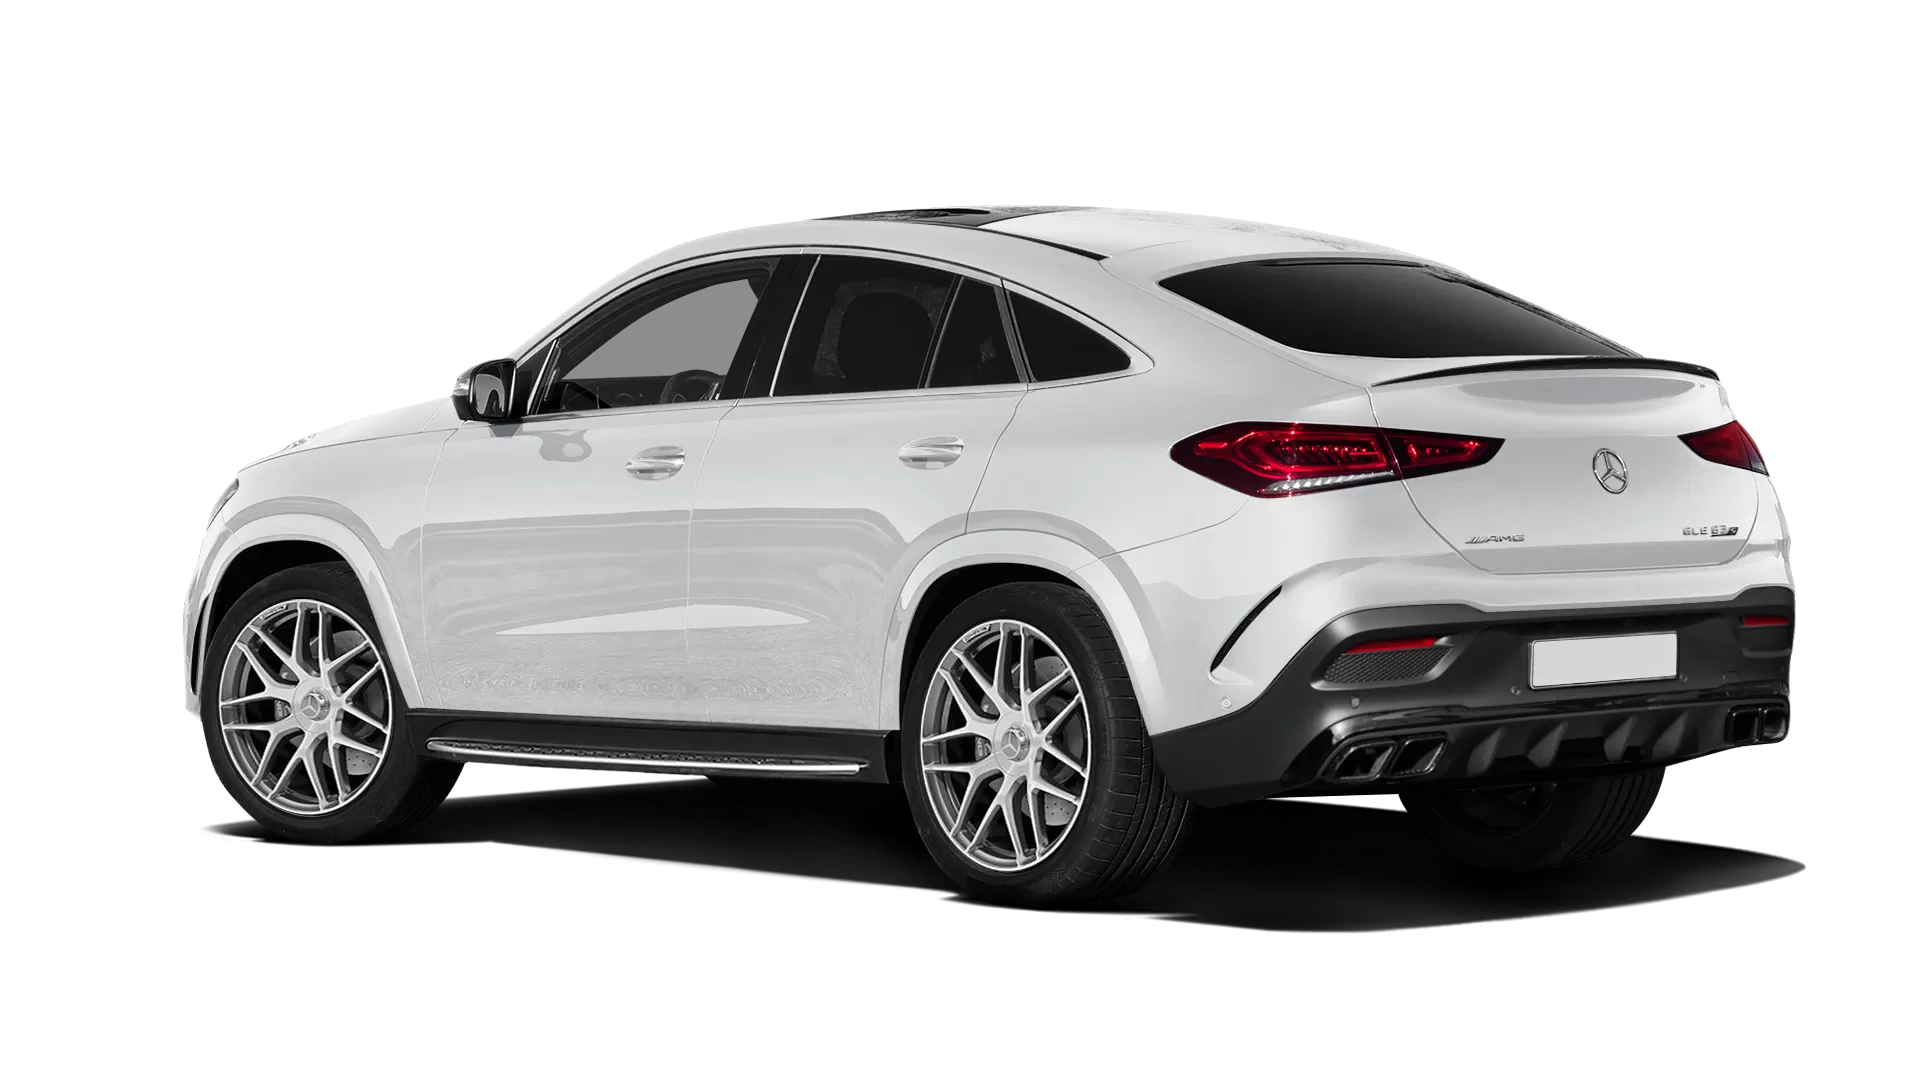 Mercedes GLE Coupe AMG 63 C167 stock rear view in Polar White color